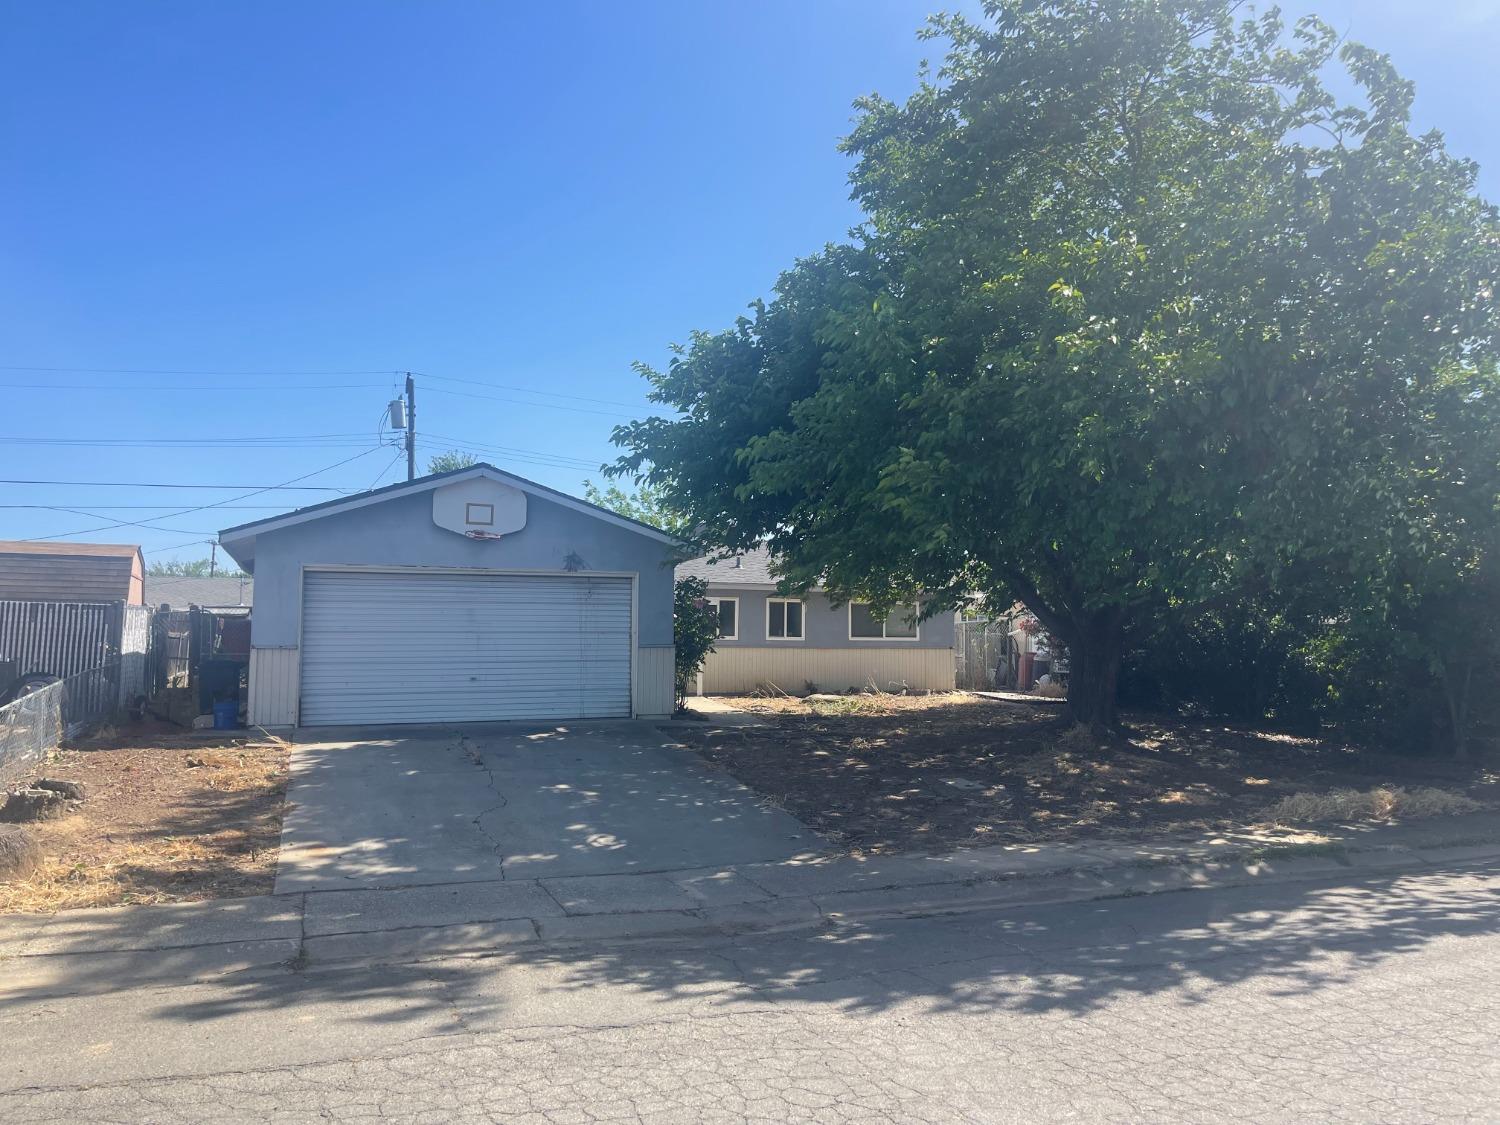 Photo of 1548 Cress Wy in Olivehurst, CA